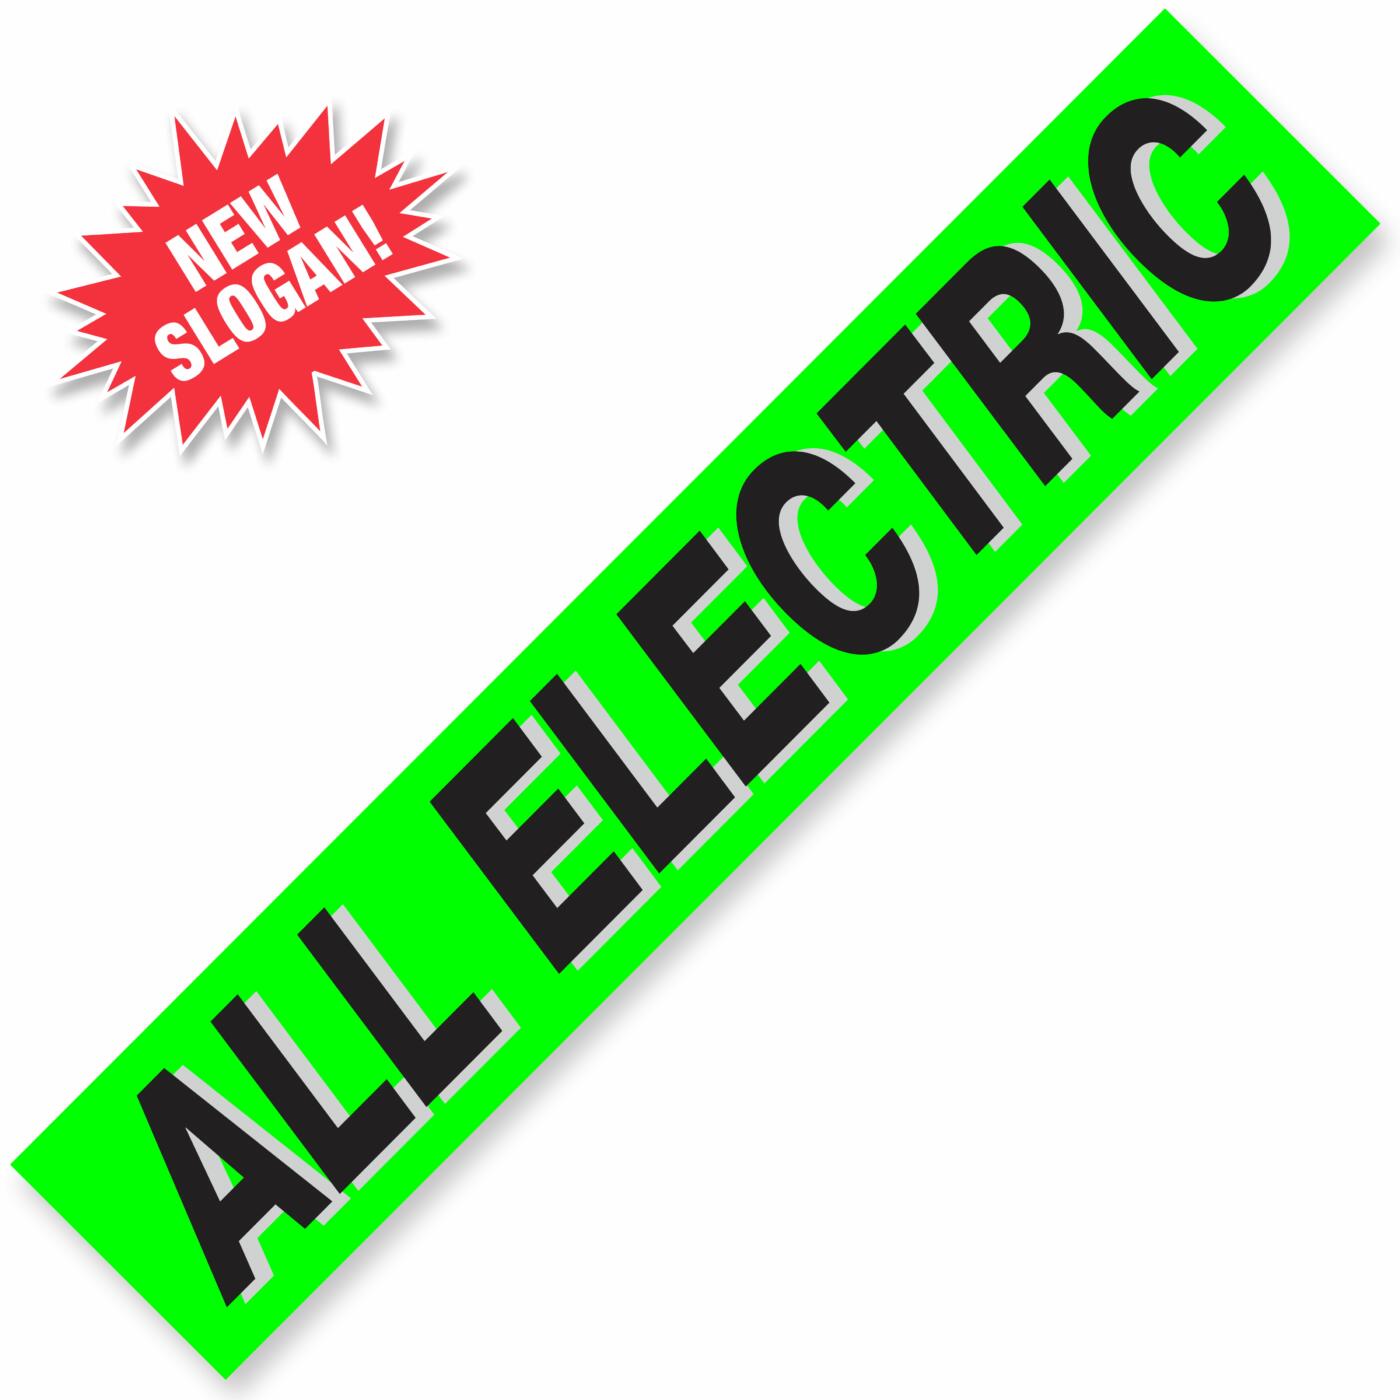 ALL ELECTRIC Windshield Slogan Signs- dealer supply company